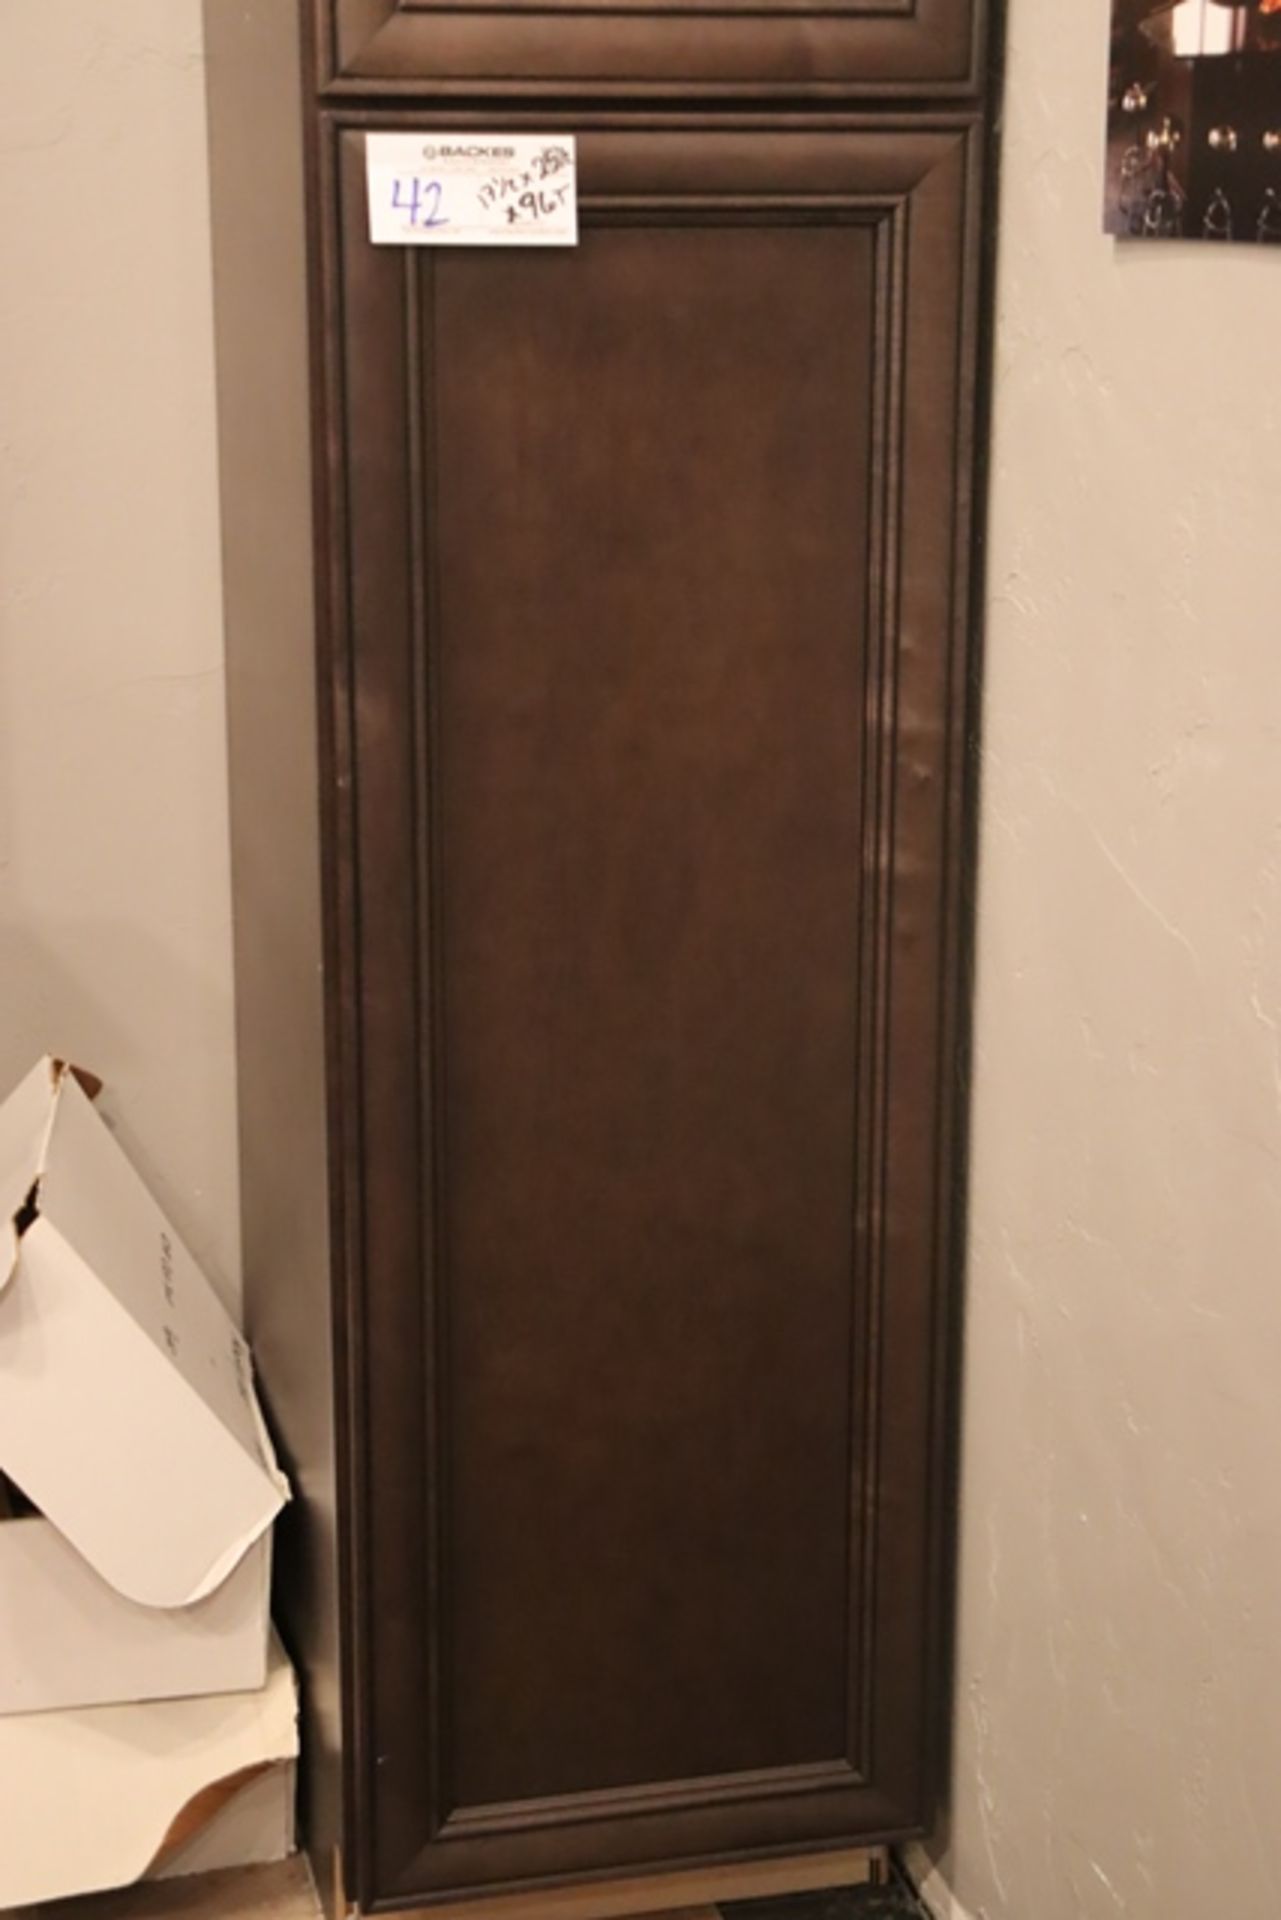 17.5" x 25.5" x 96" tall pantry cabinet - Image 2 of 2